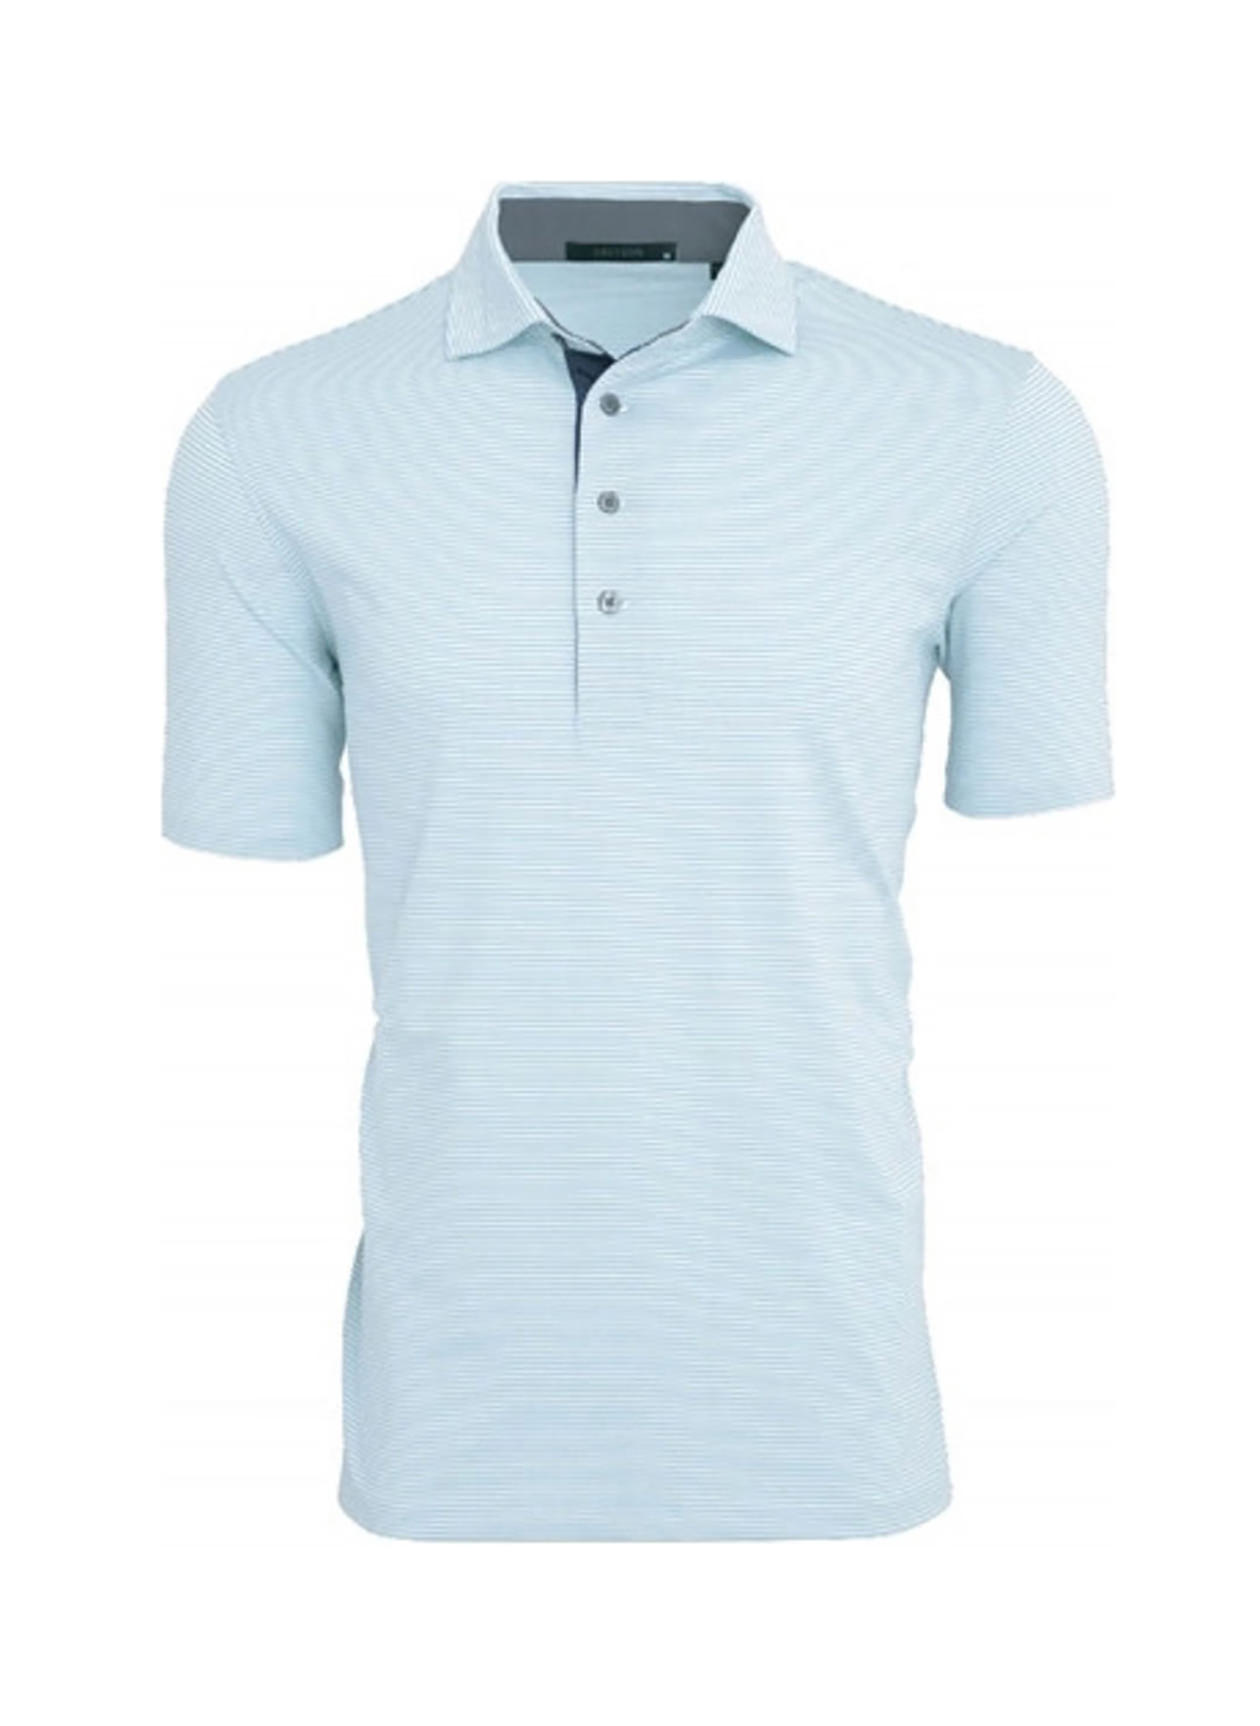 Men's Serpentine Polo Shirt in White, Size Small by Greyson Clothiers